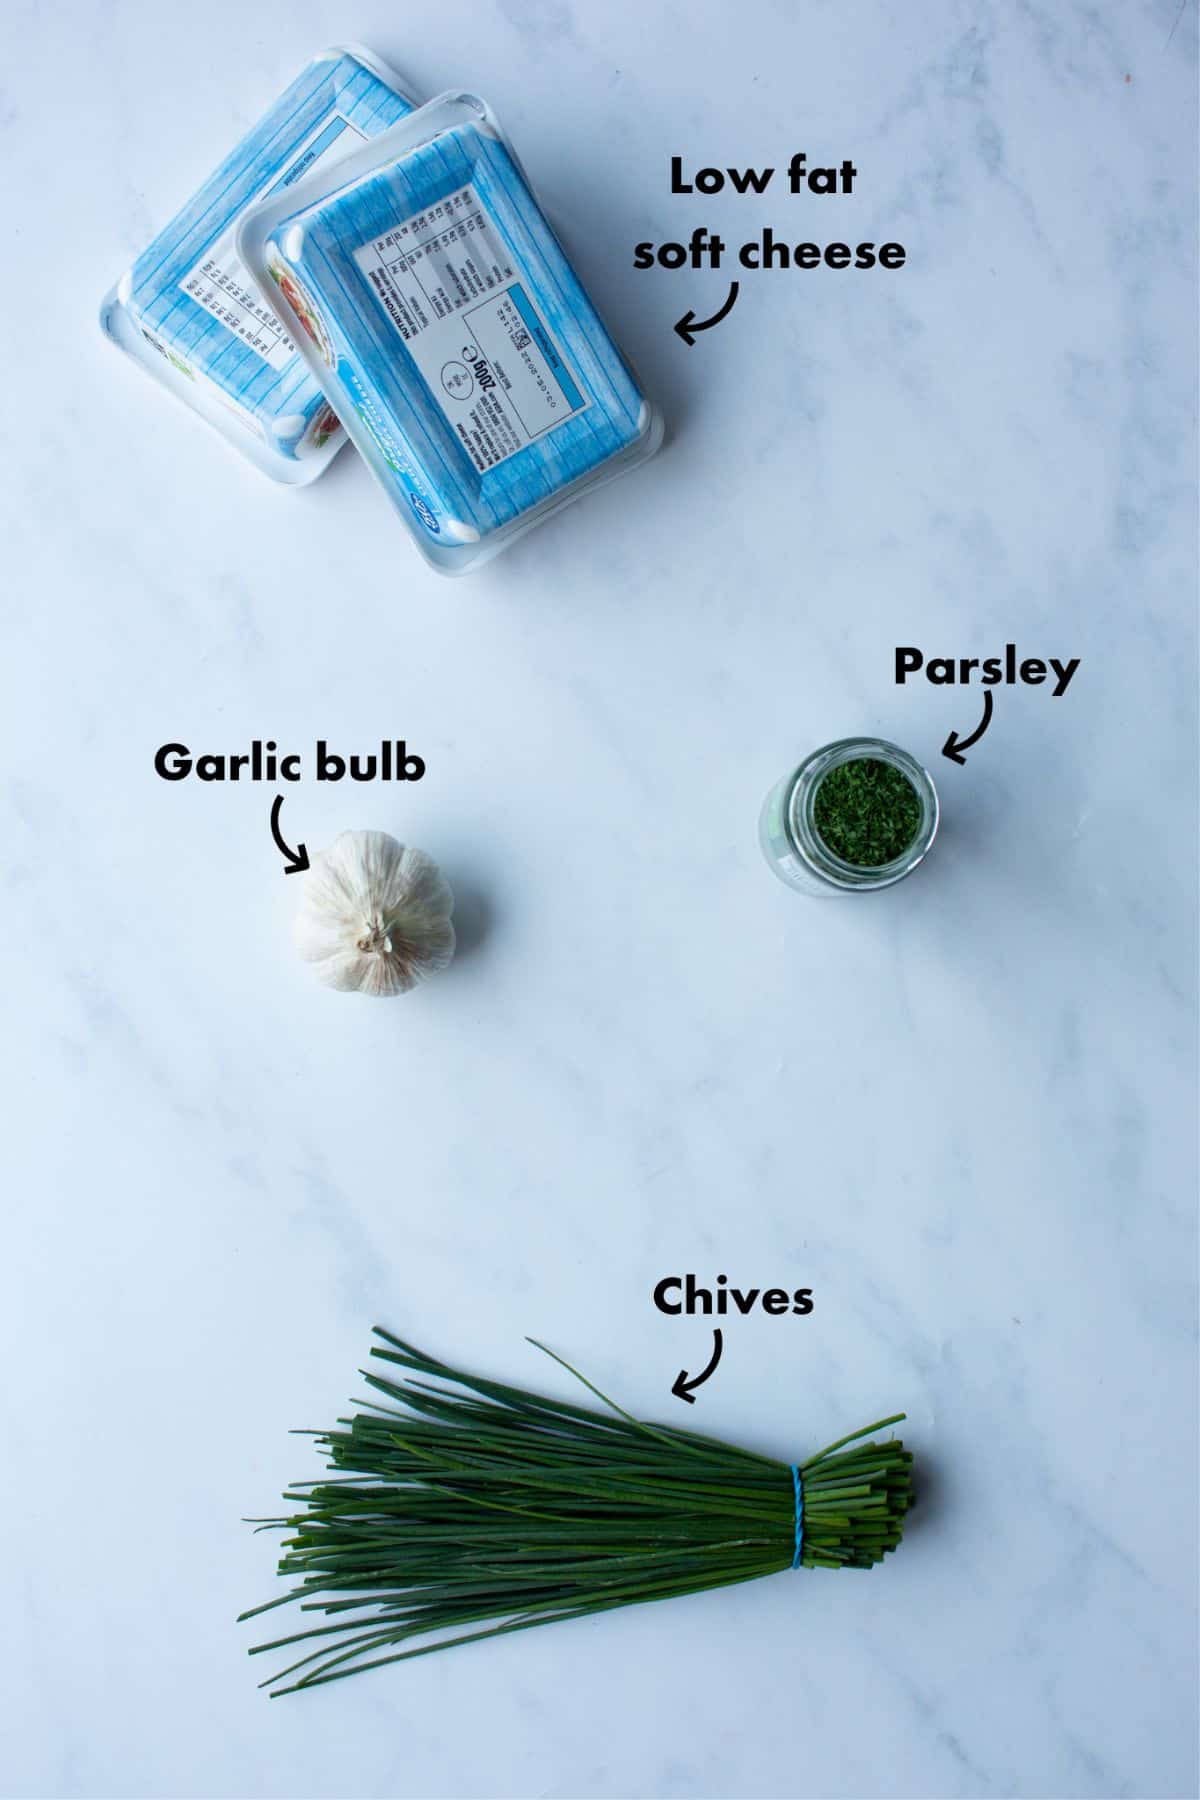 Ingredients to make Budget Philadelphia cheese laid out on a greyish background and labelled.